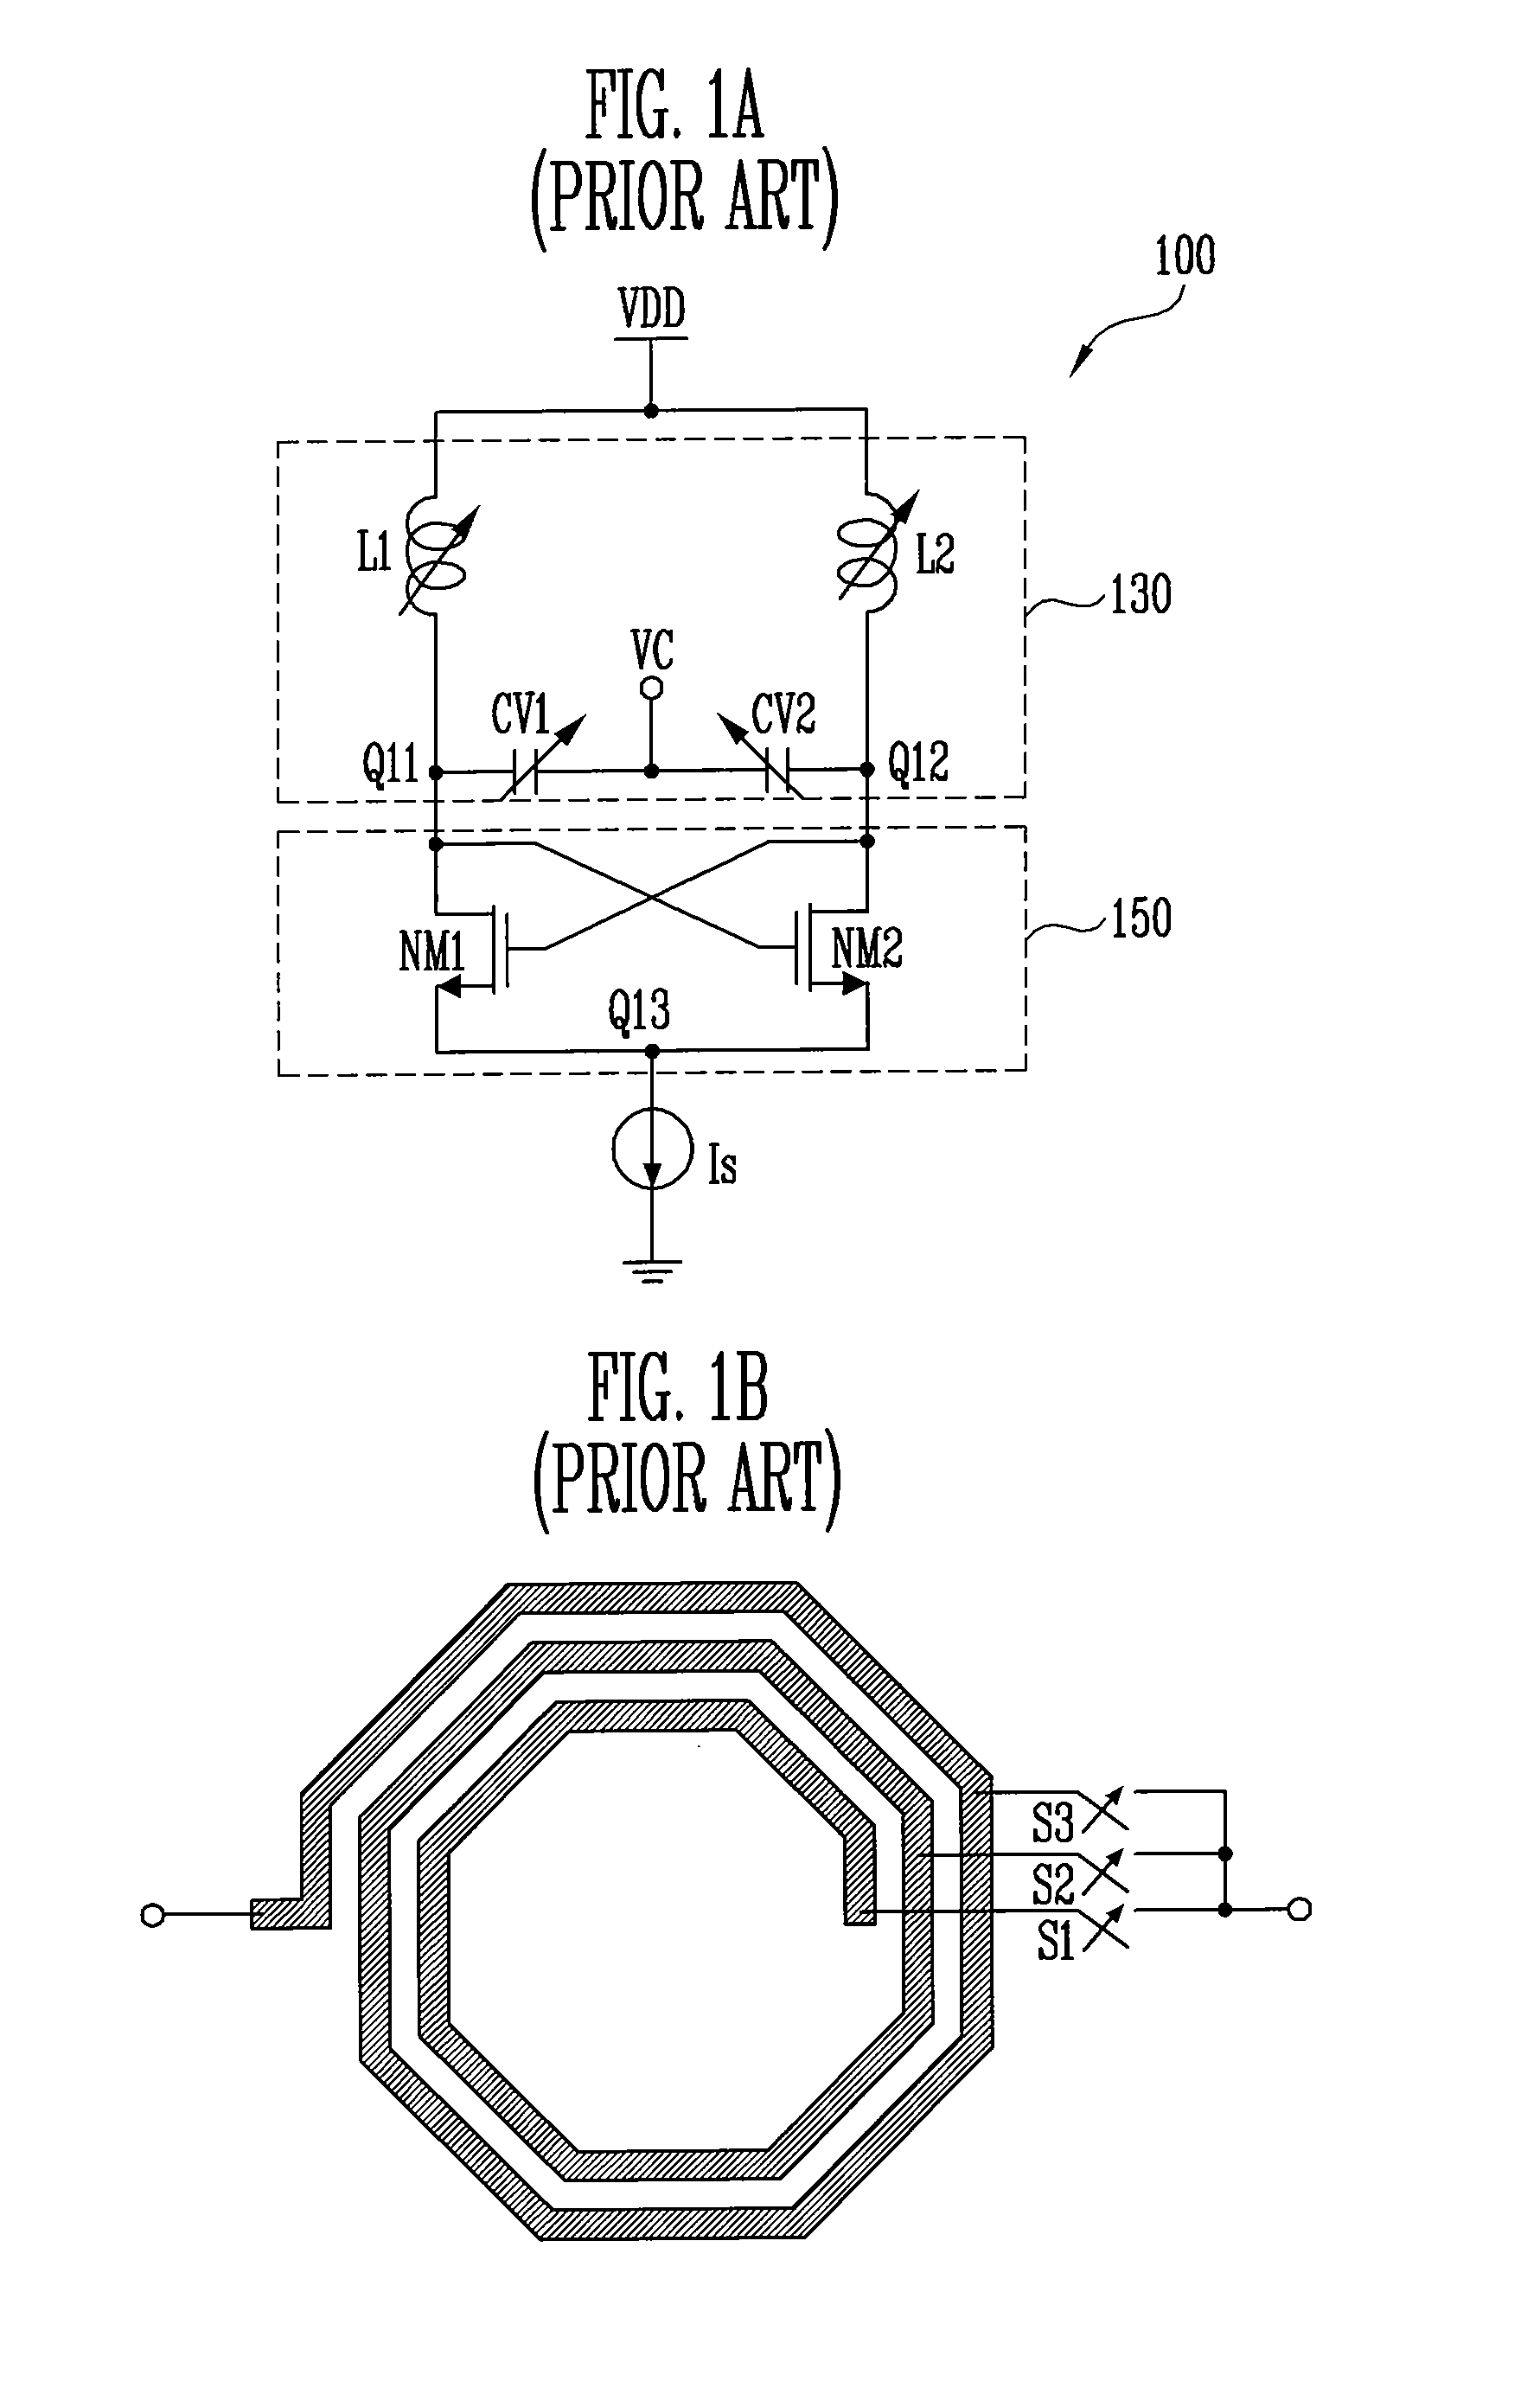 Voltage-controlled oscillator with wide oscillation frequency range and linear characteristics